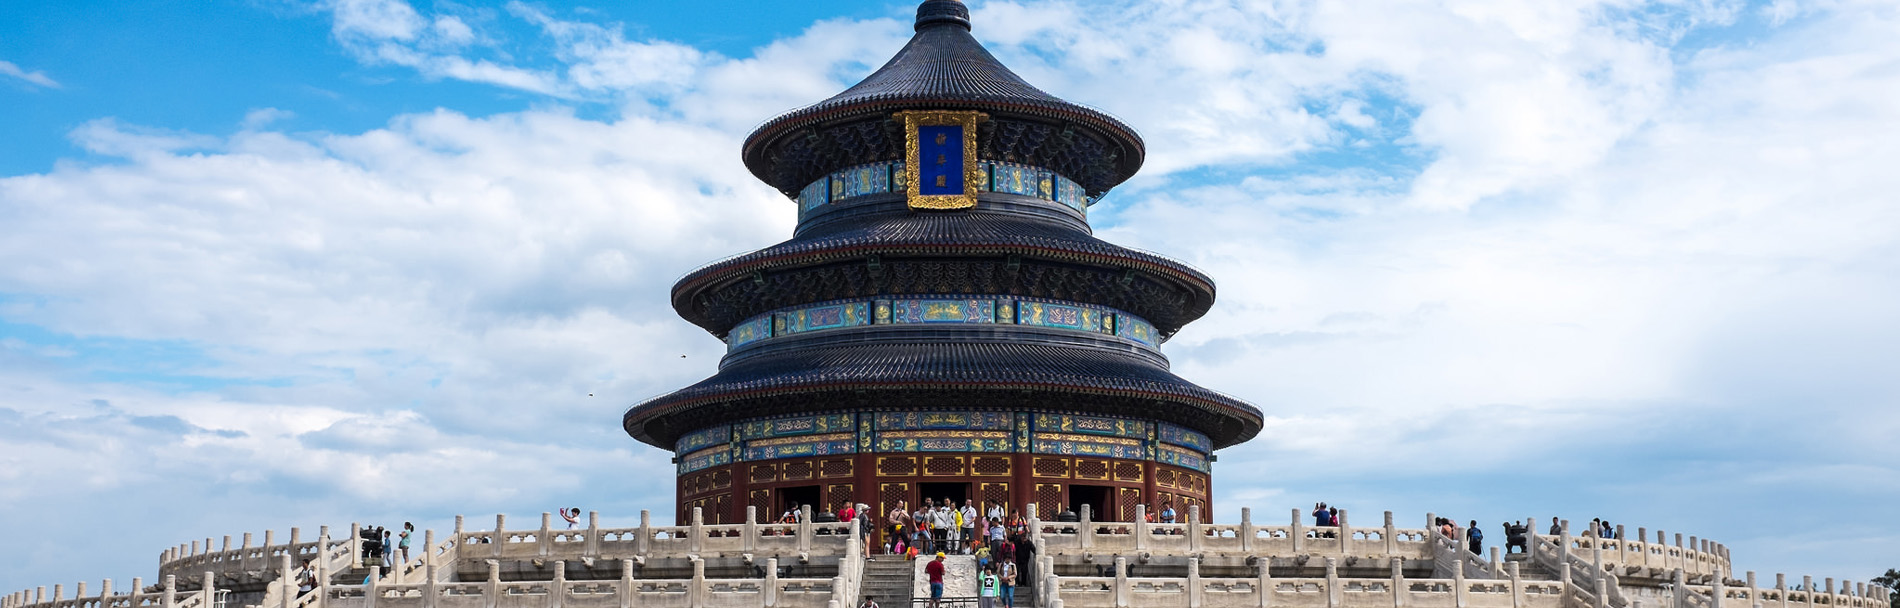 China Tour Package - 6 Nights